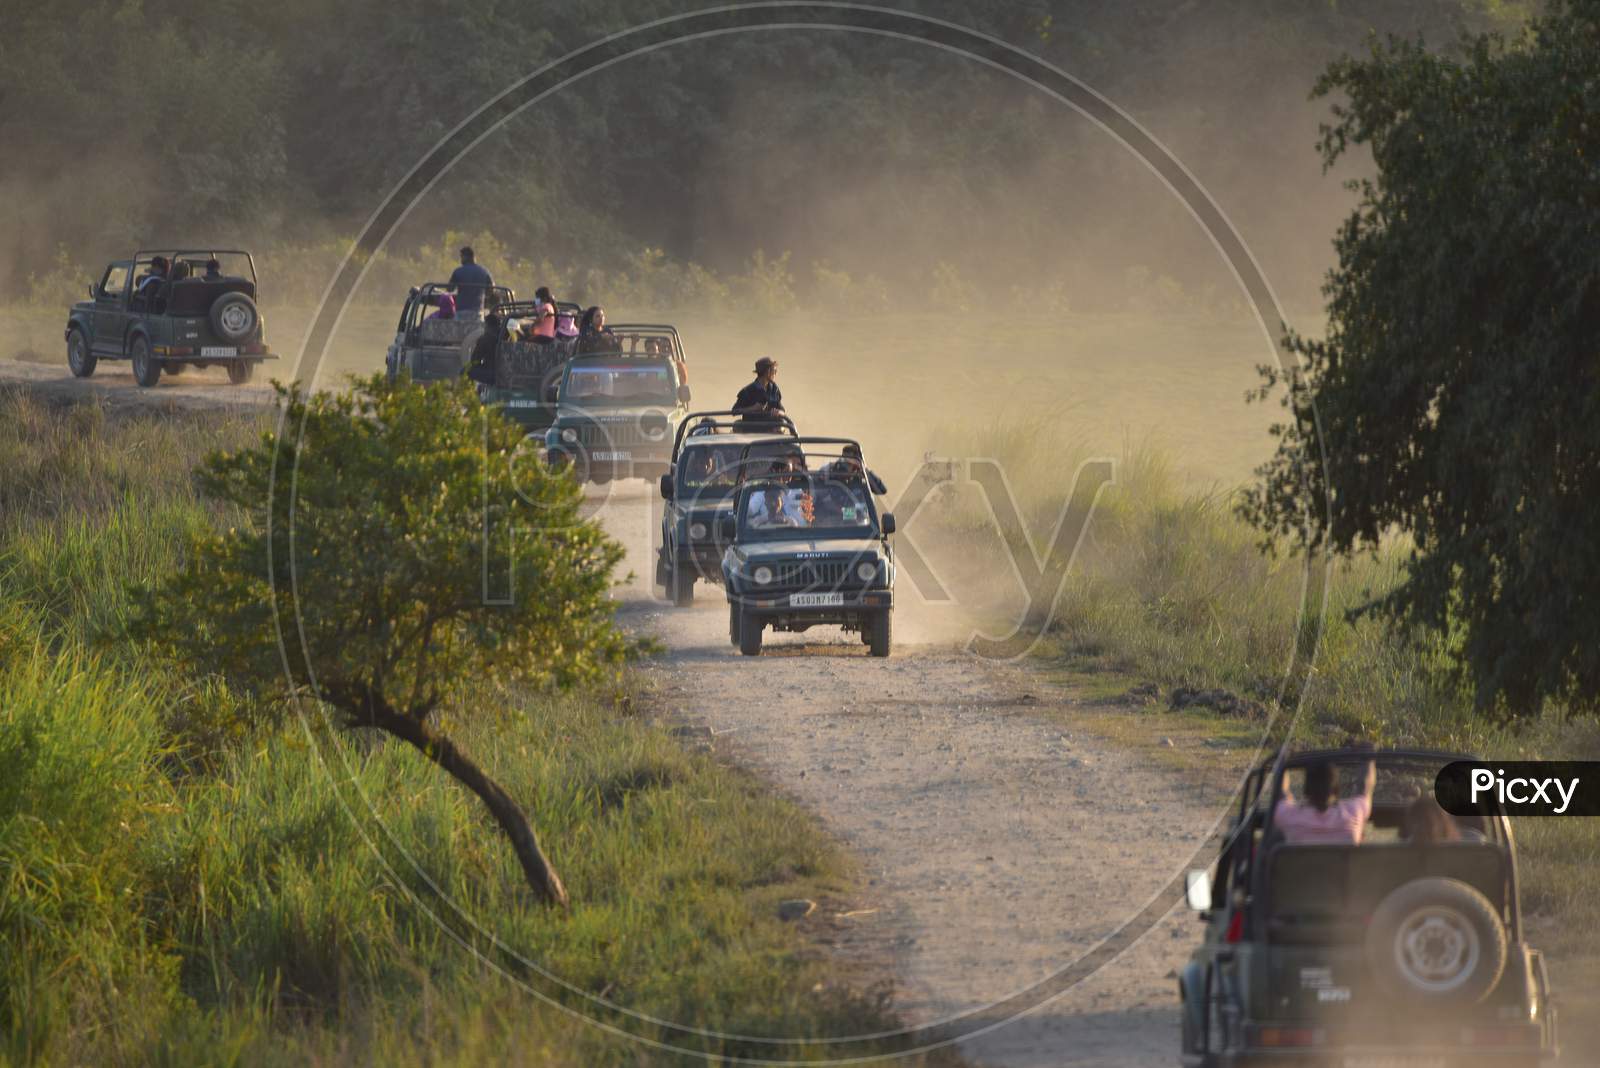 Tourists enjoy Jeep Safari on the first day of New Year 2021 inside the Kohora Range of Kaziranga National Park in Golaghat District of Assam on Jan 1,2021